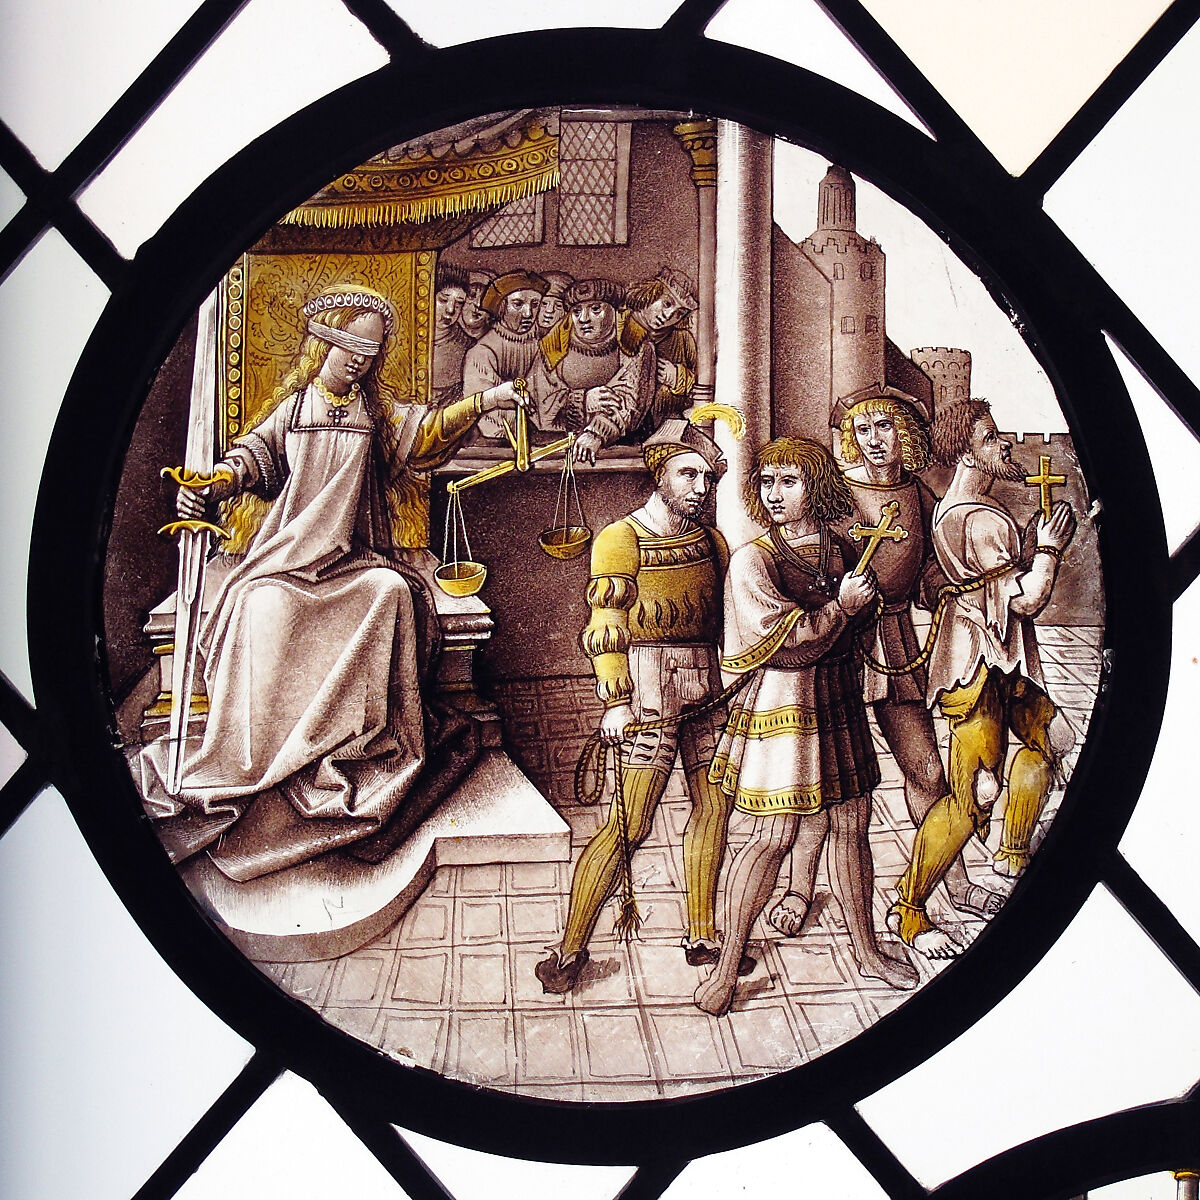 Roundel with Justice, Colorless glass, vitreous paint and silver stain, North Netherlandish